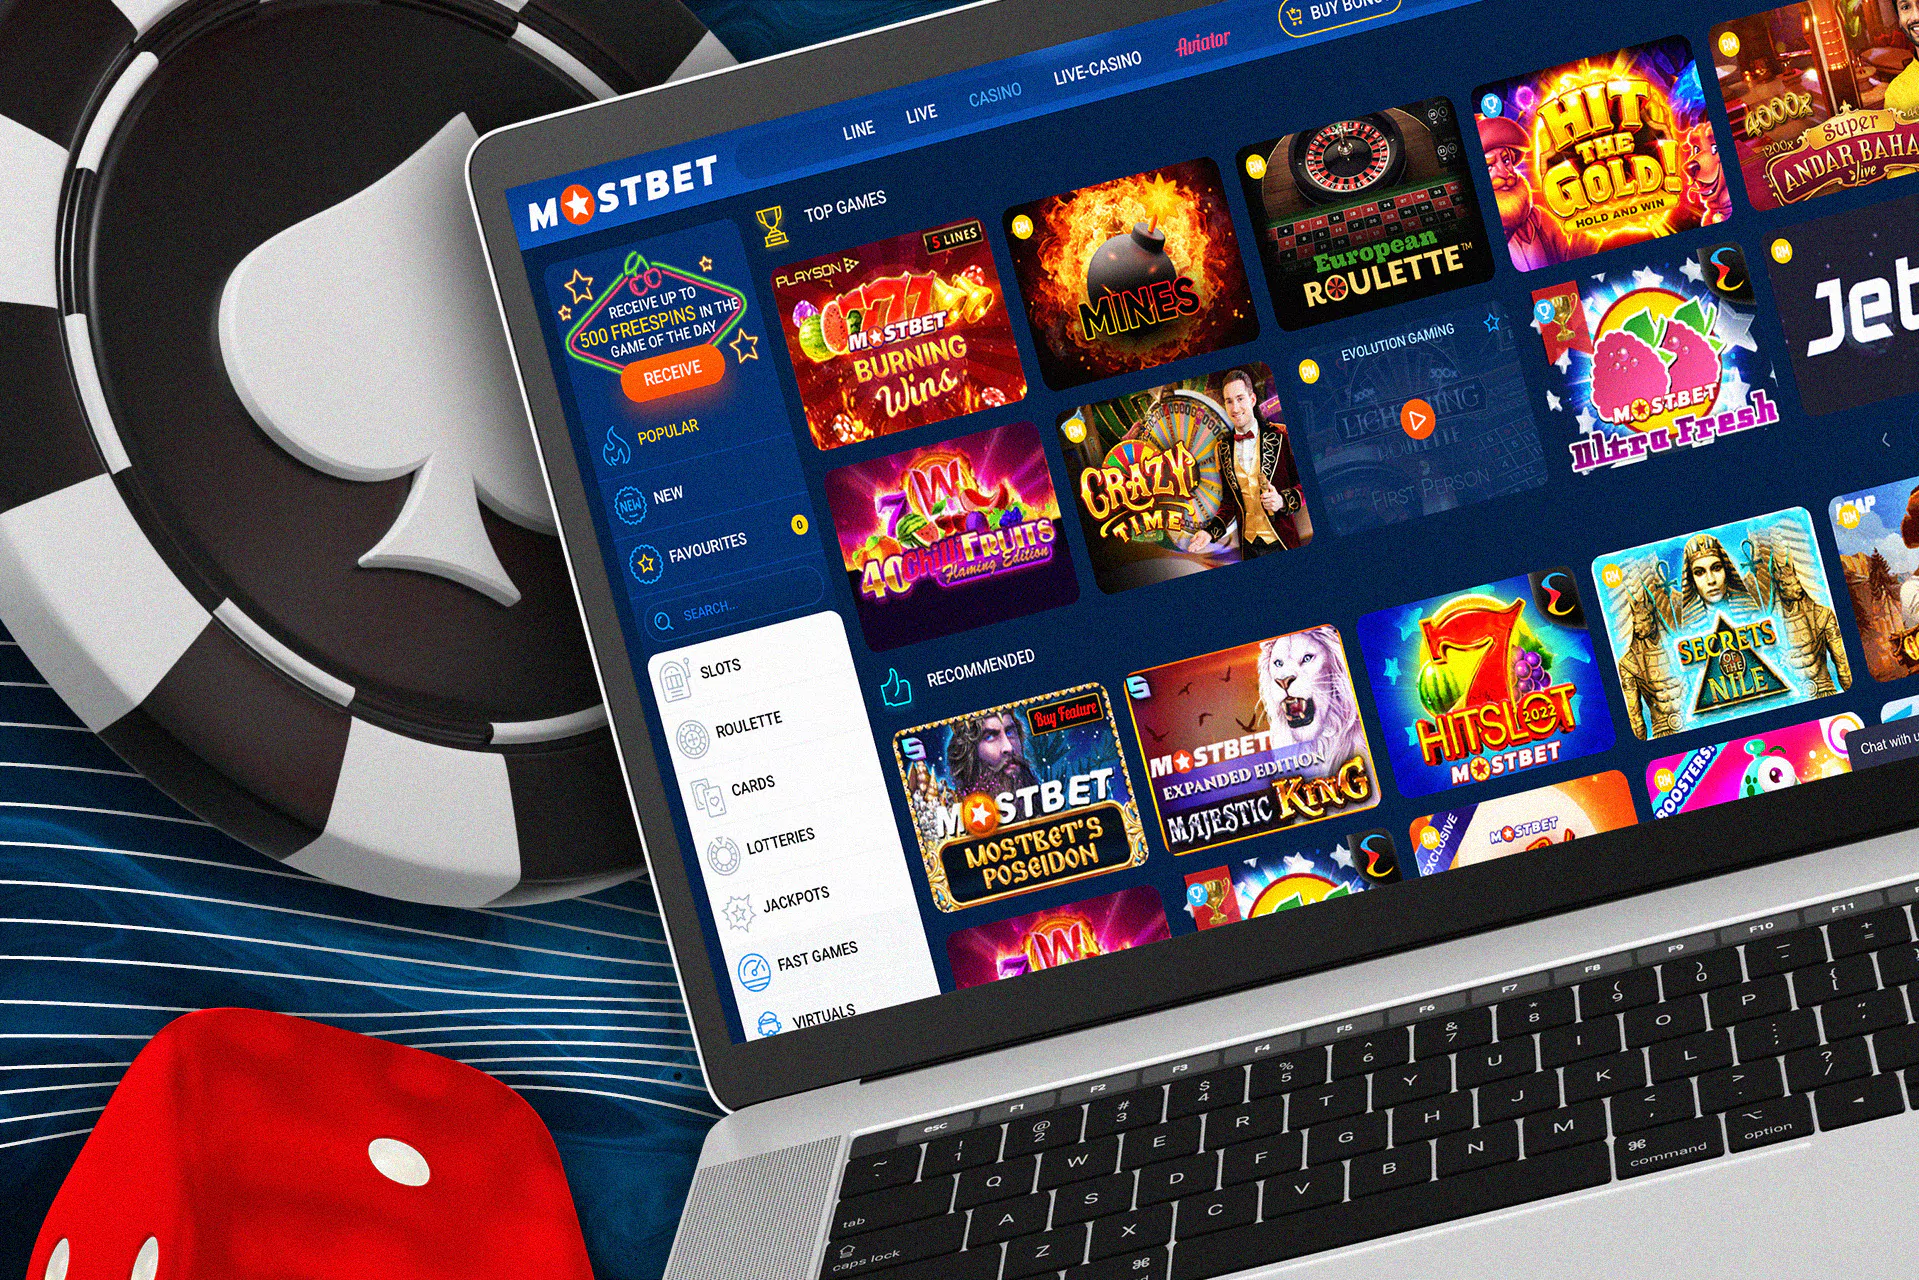 Section with the top popular games in the casino chapter of the PC version of the site.